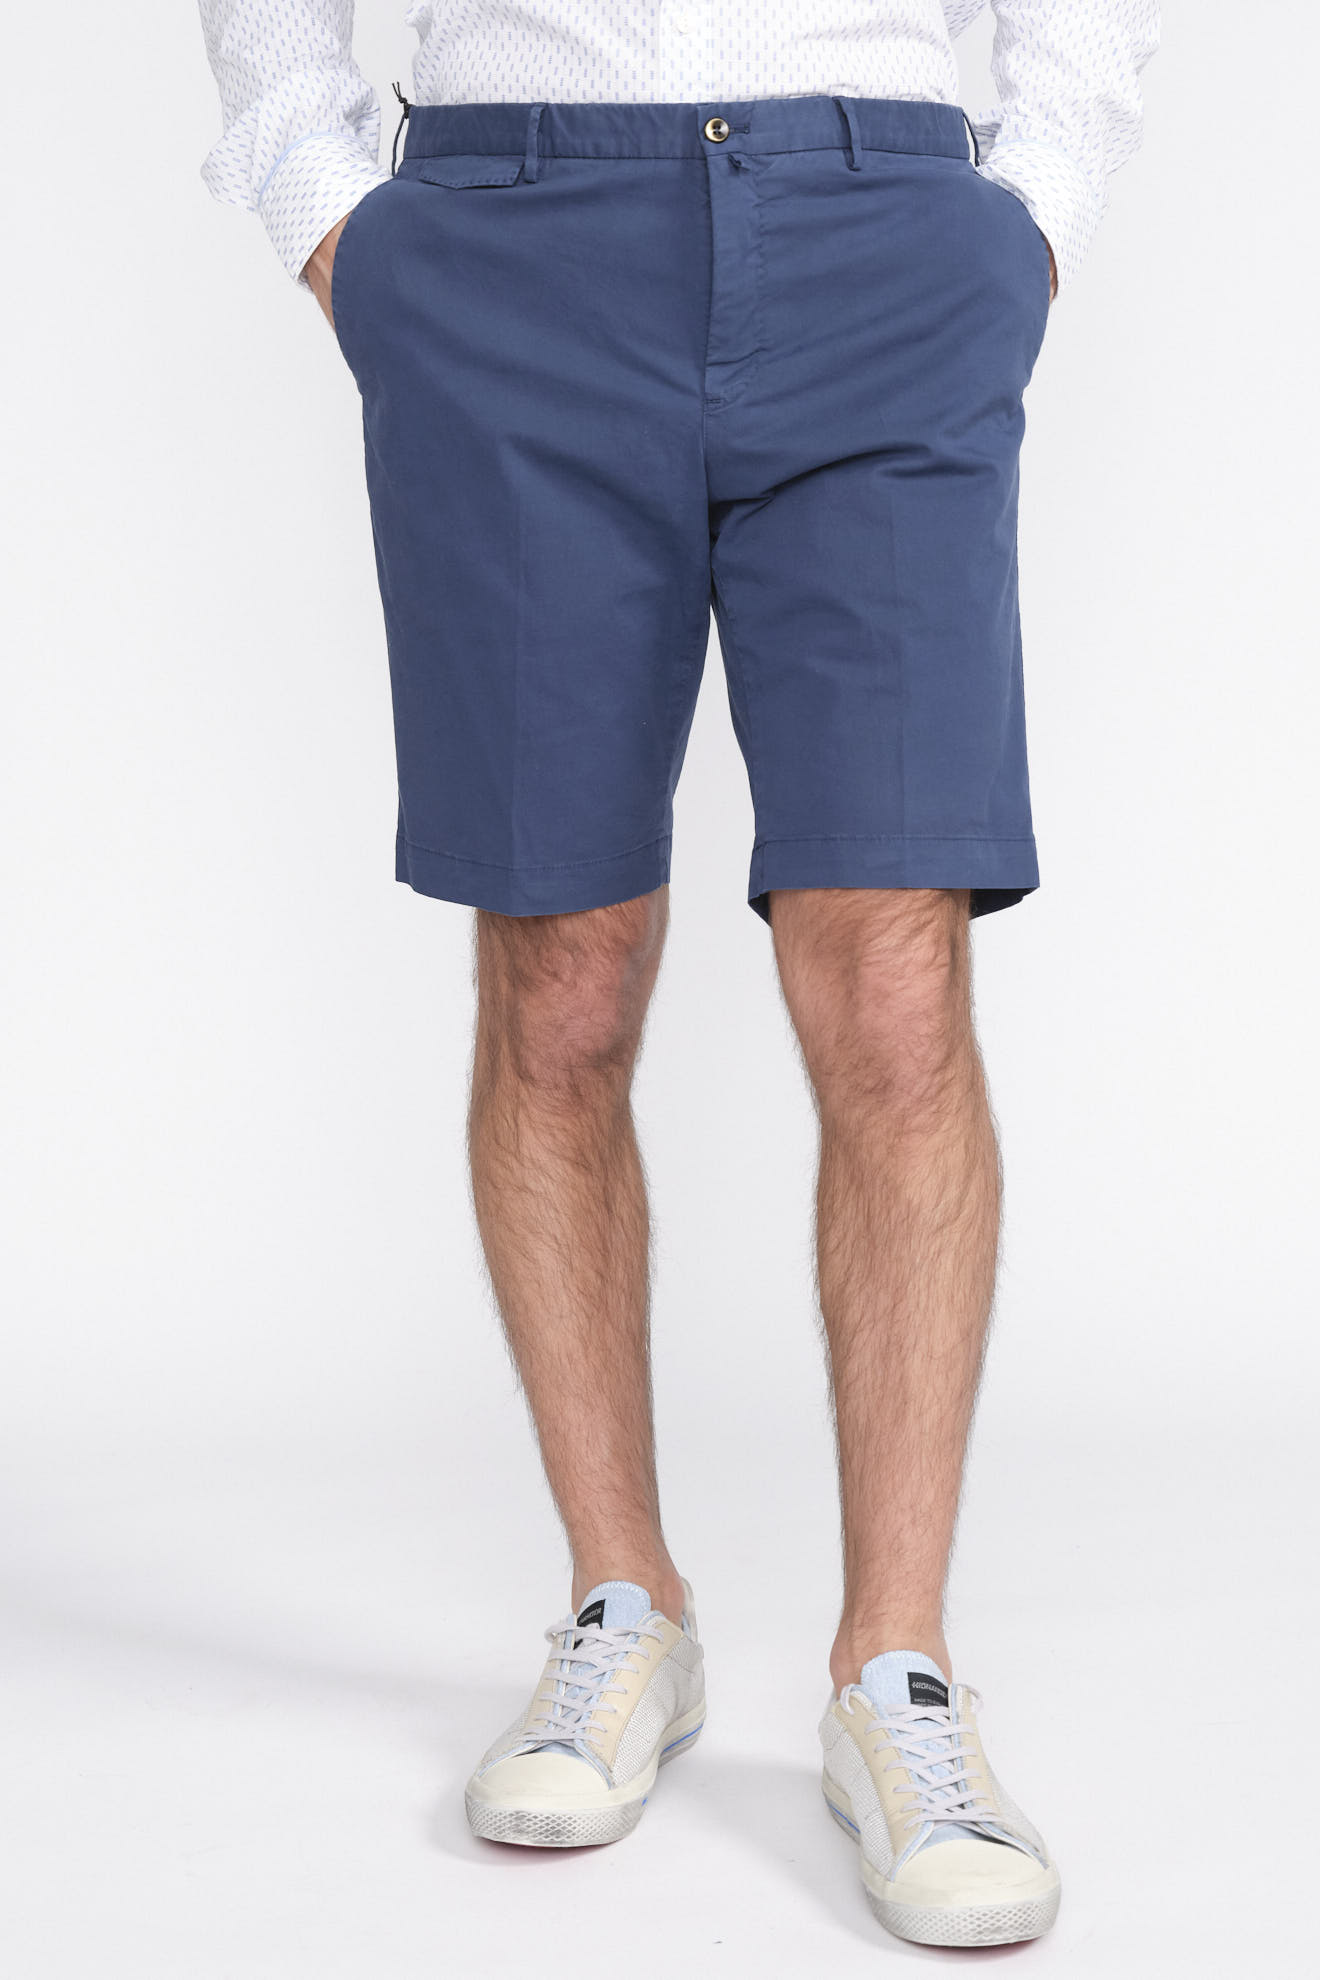 PT Torino Bermuda shorts with button placket and patch pockets blue 48